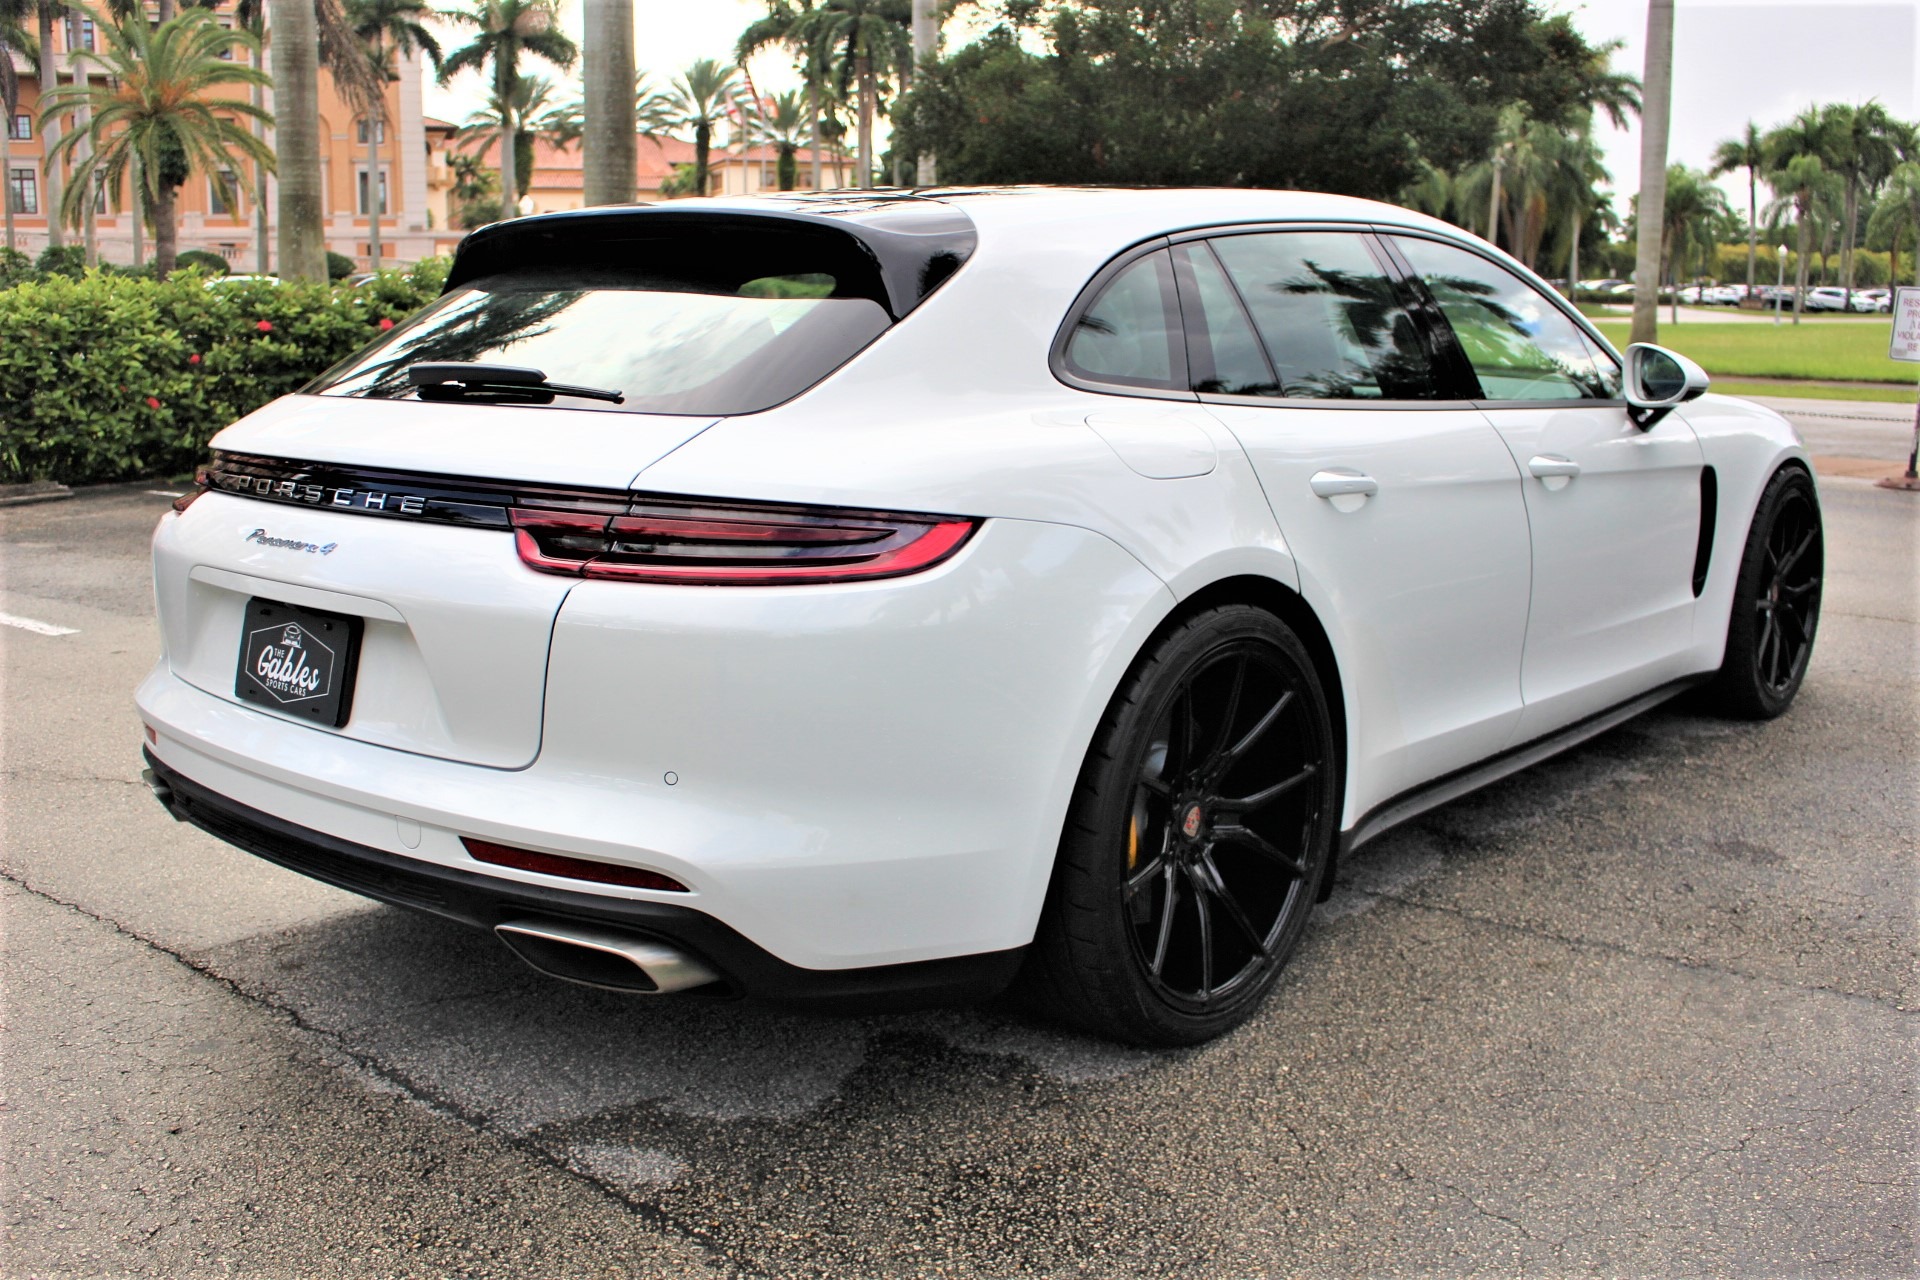 Used 2018 Porsche Panamera 4 Sport Turismo for sale Sold at The Gables Sports Cars in Miami FL 33146 3